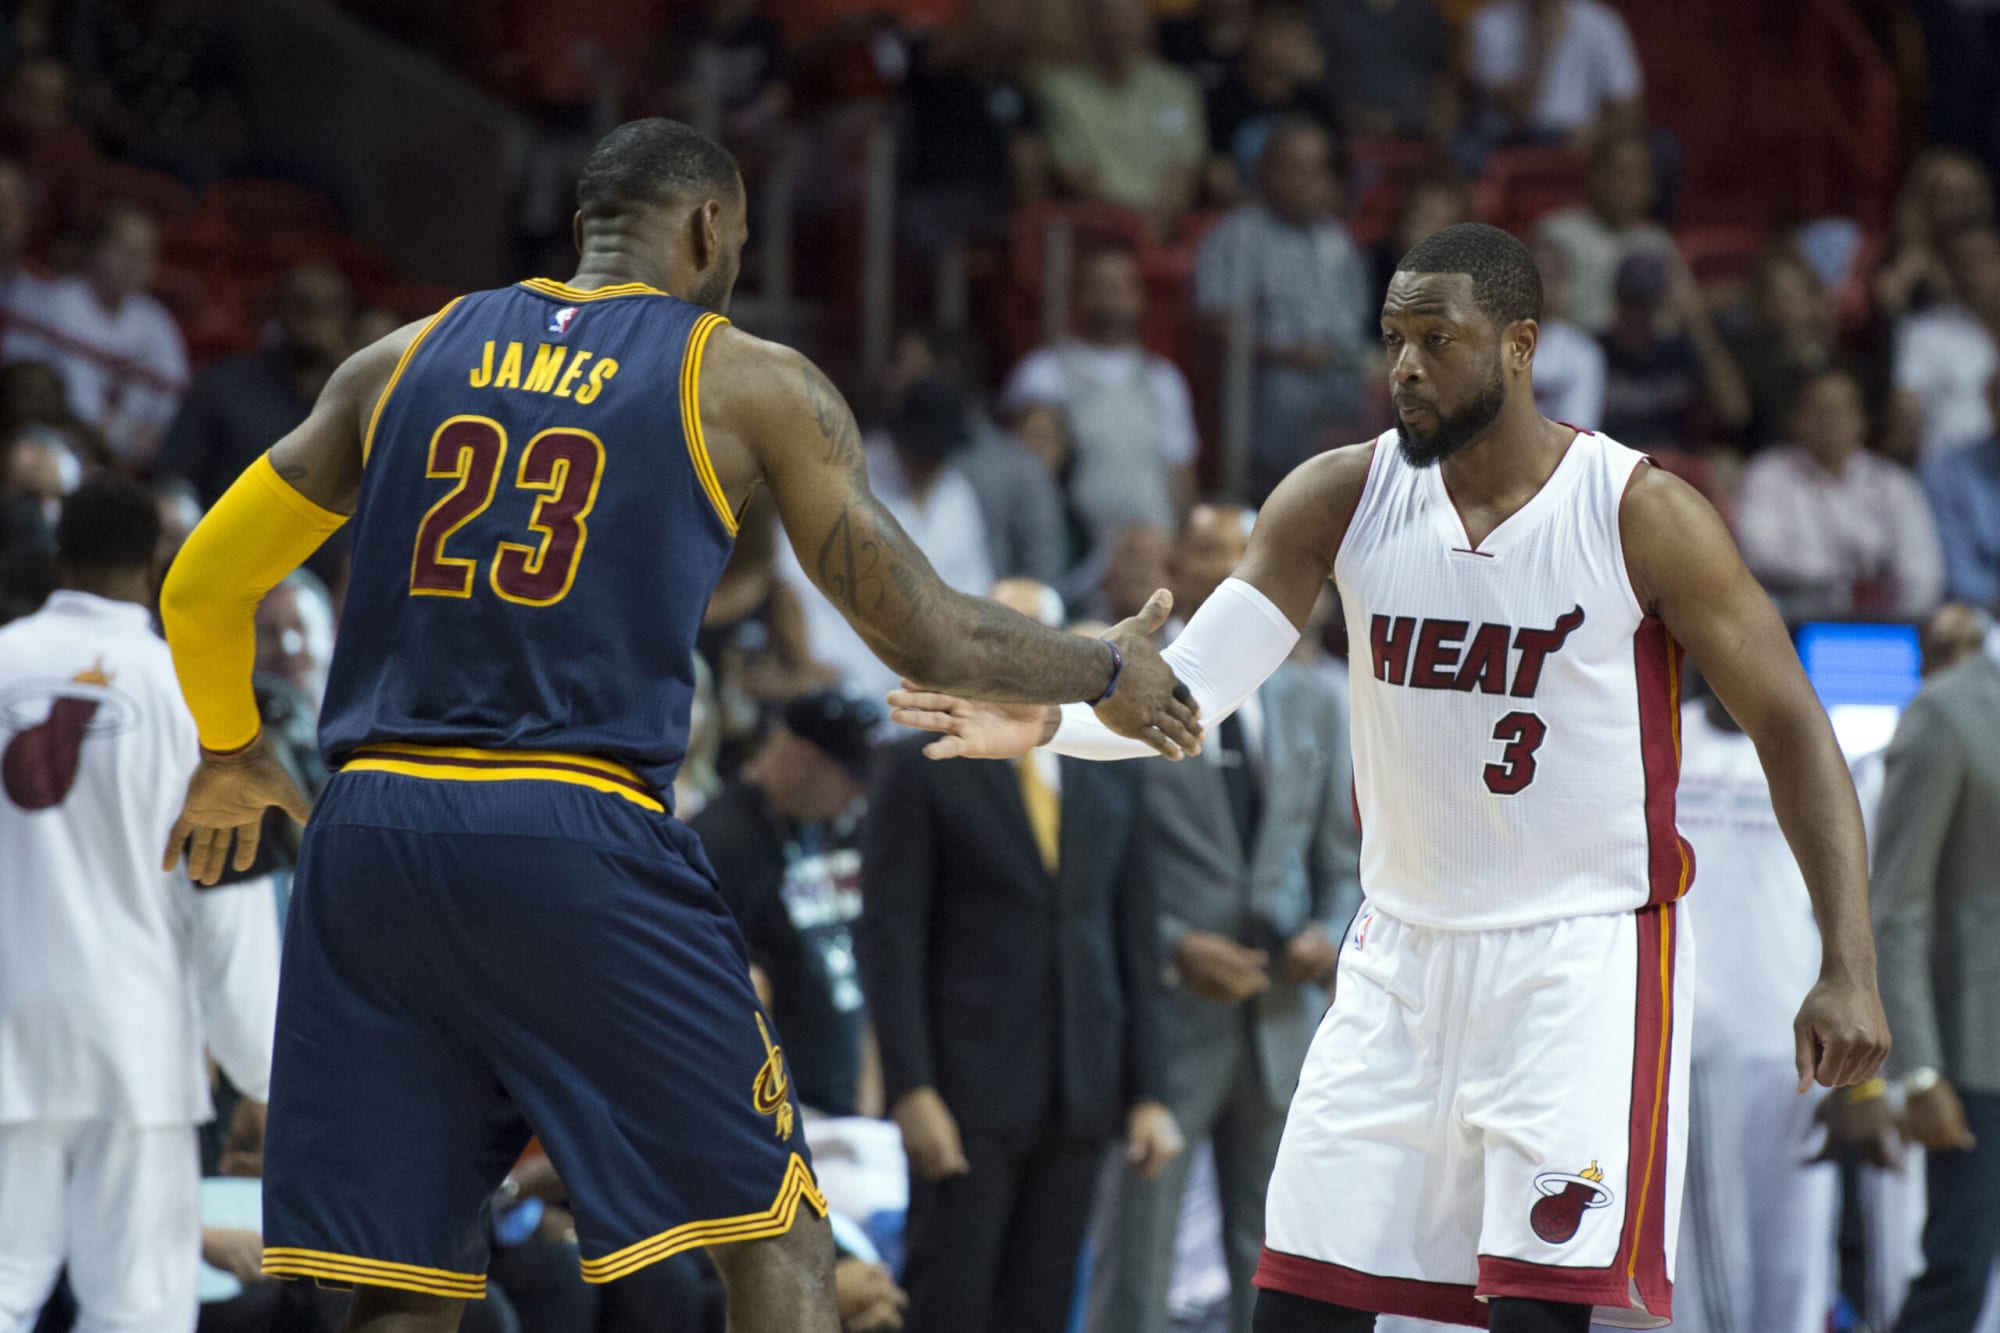 Miami Heat Rumors: Dwyane Wade to Have Meeting with Cleveland Cavaliers